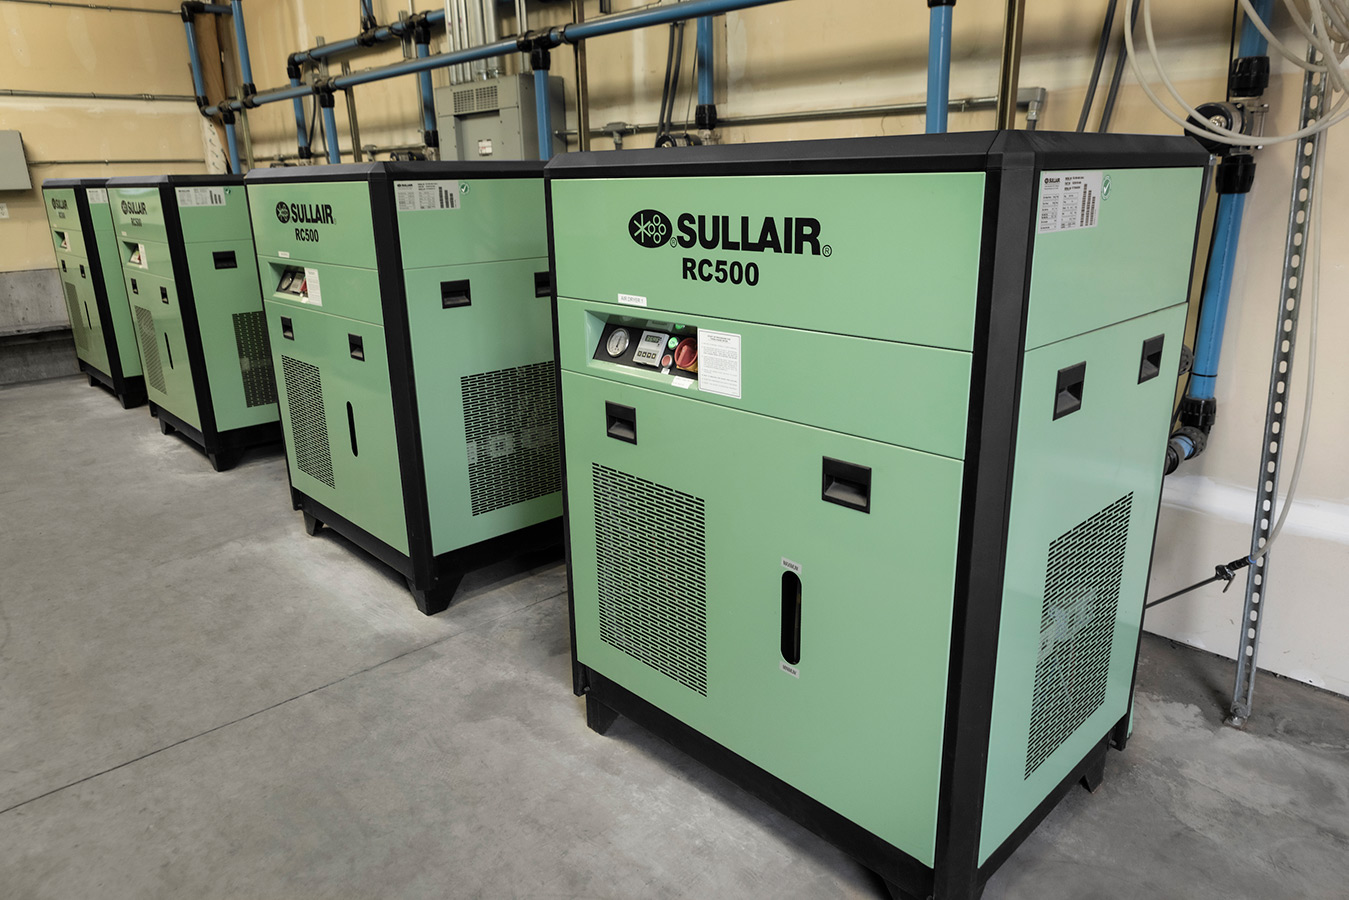 Sullair RC500 refrigerated dryer installation